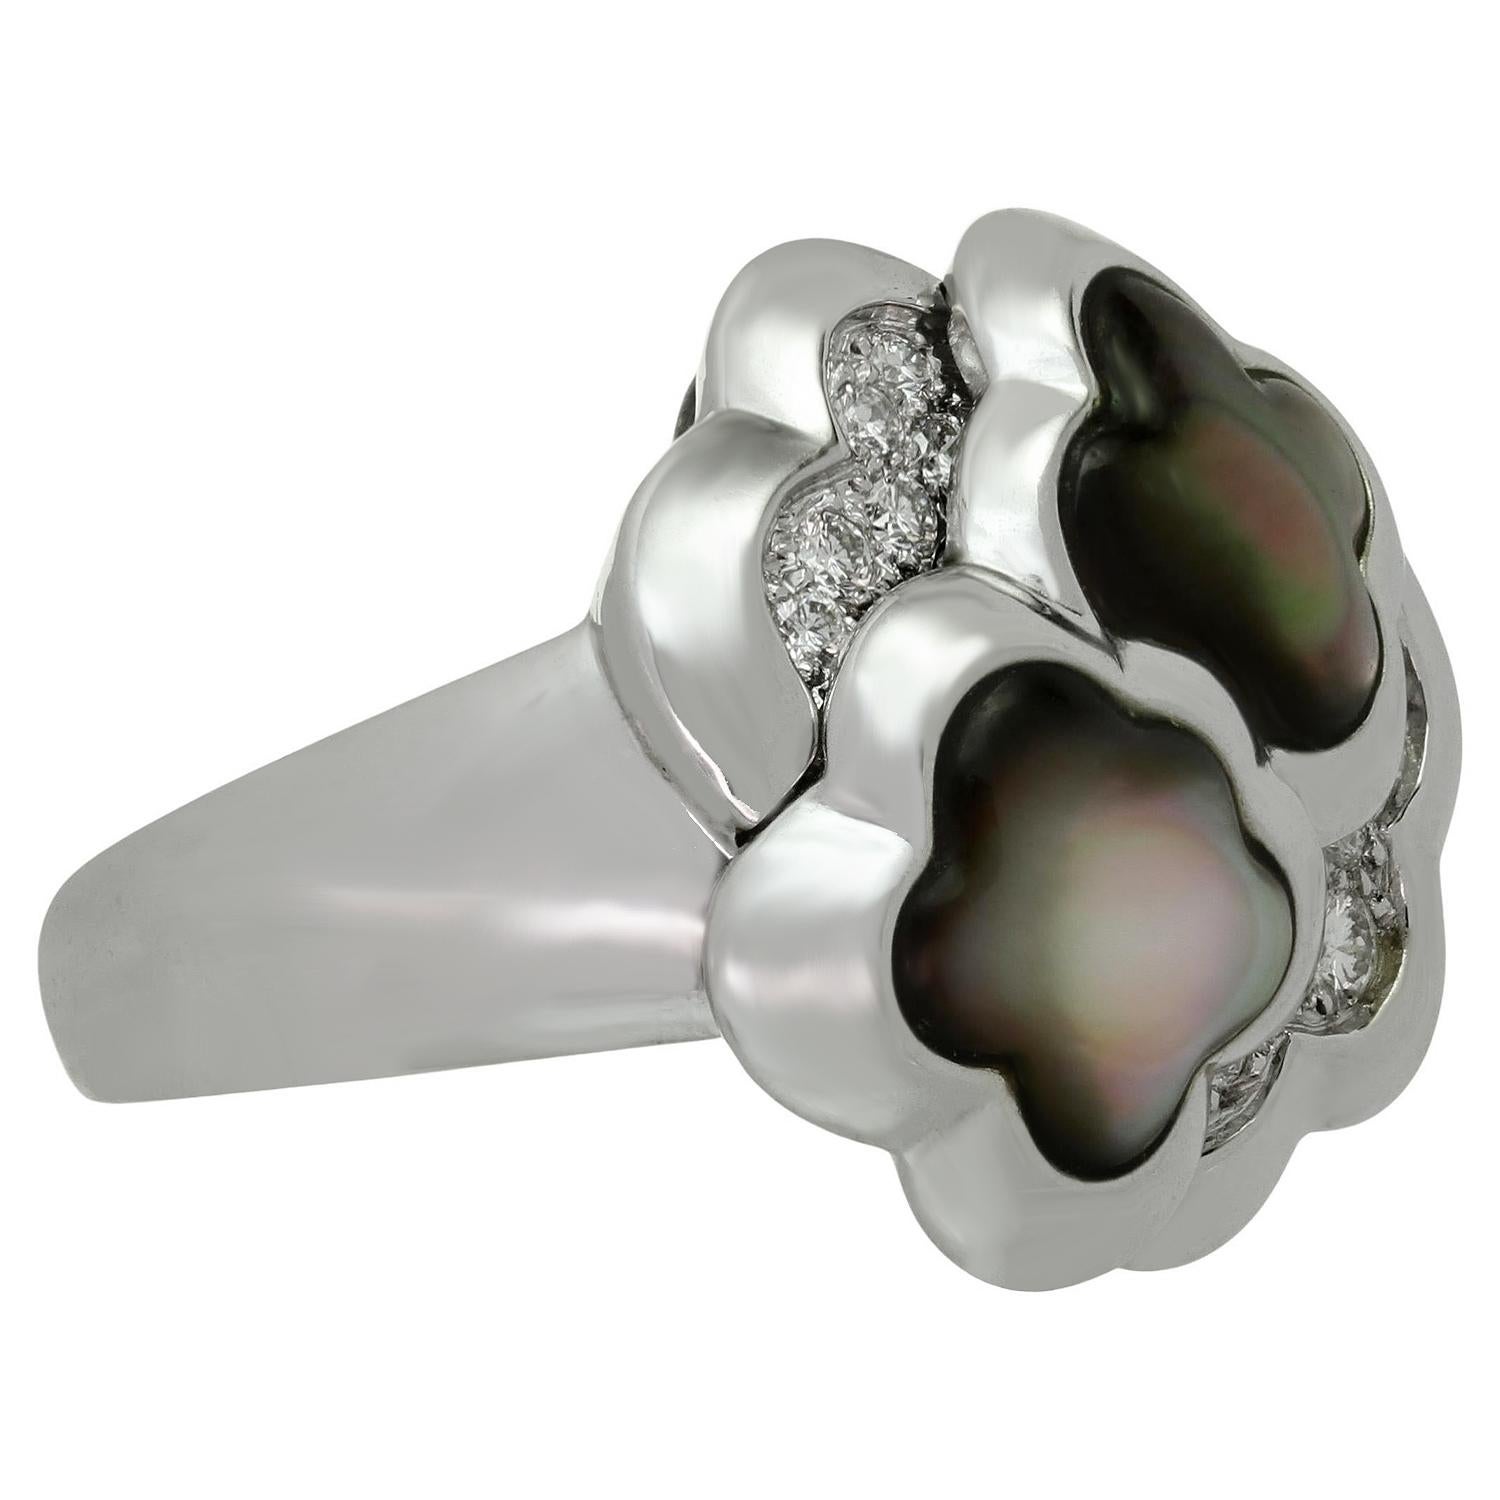 This elegant Van Cleef & Arpels ring from the iconic Pure Alhambra collection features a 2 lucky clover design crafted in 18k white gold and set with iridescent gray mother-of-pearl. Made in France circa 1990s. Measurements: 0.78